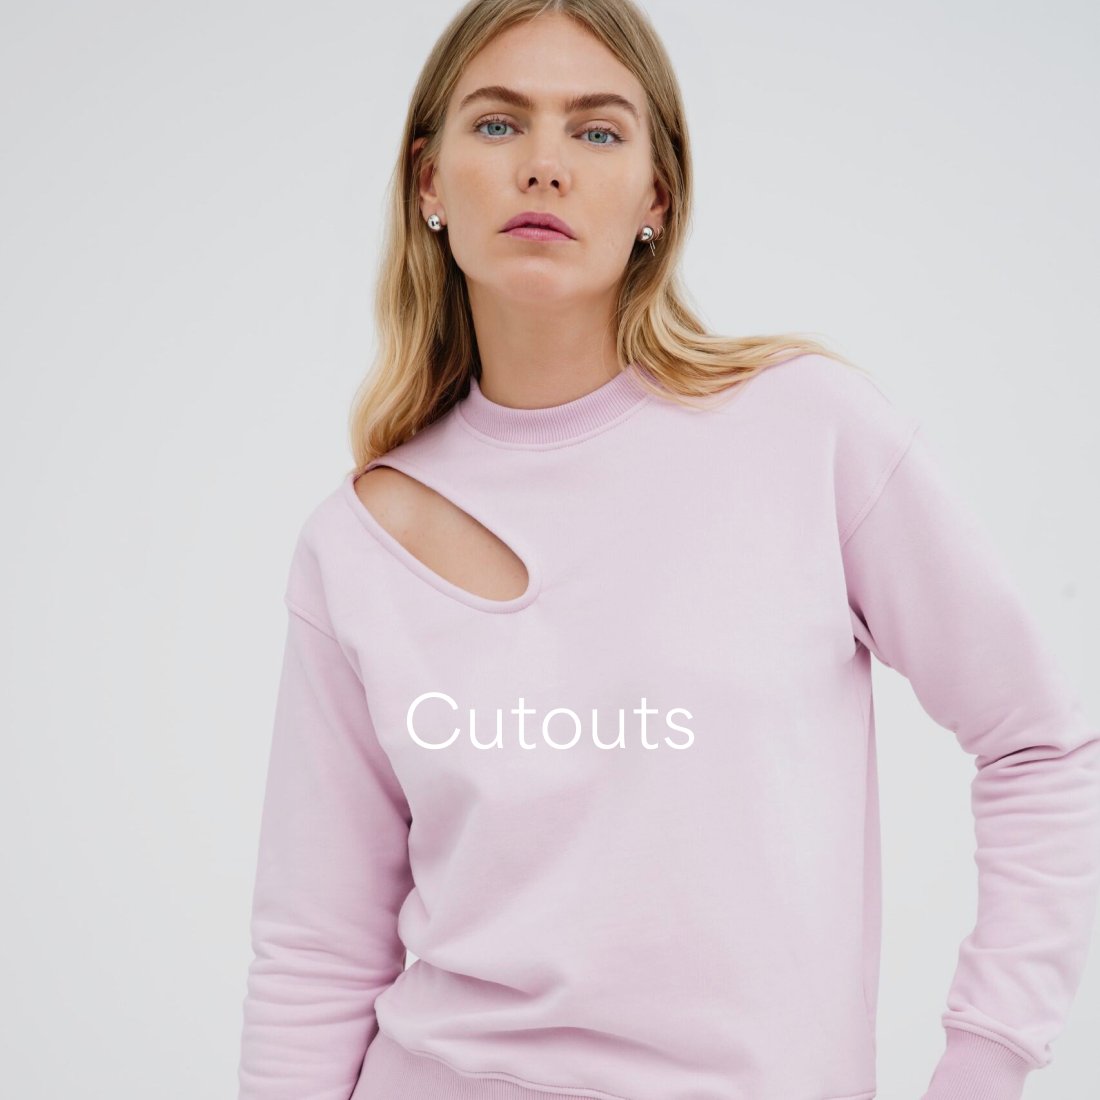 Symphony of Cutouts - Tops with Cutouts